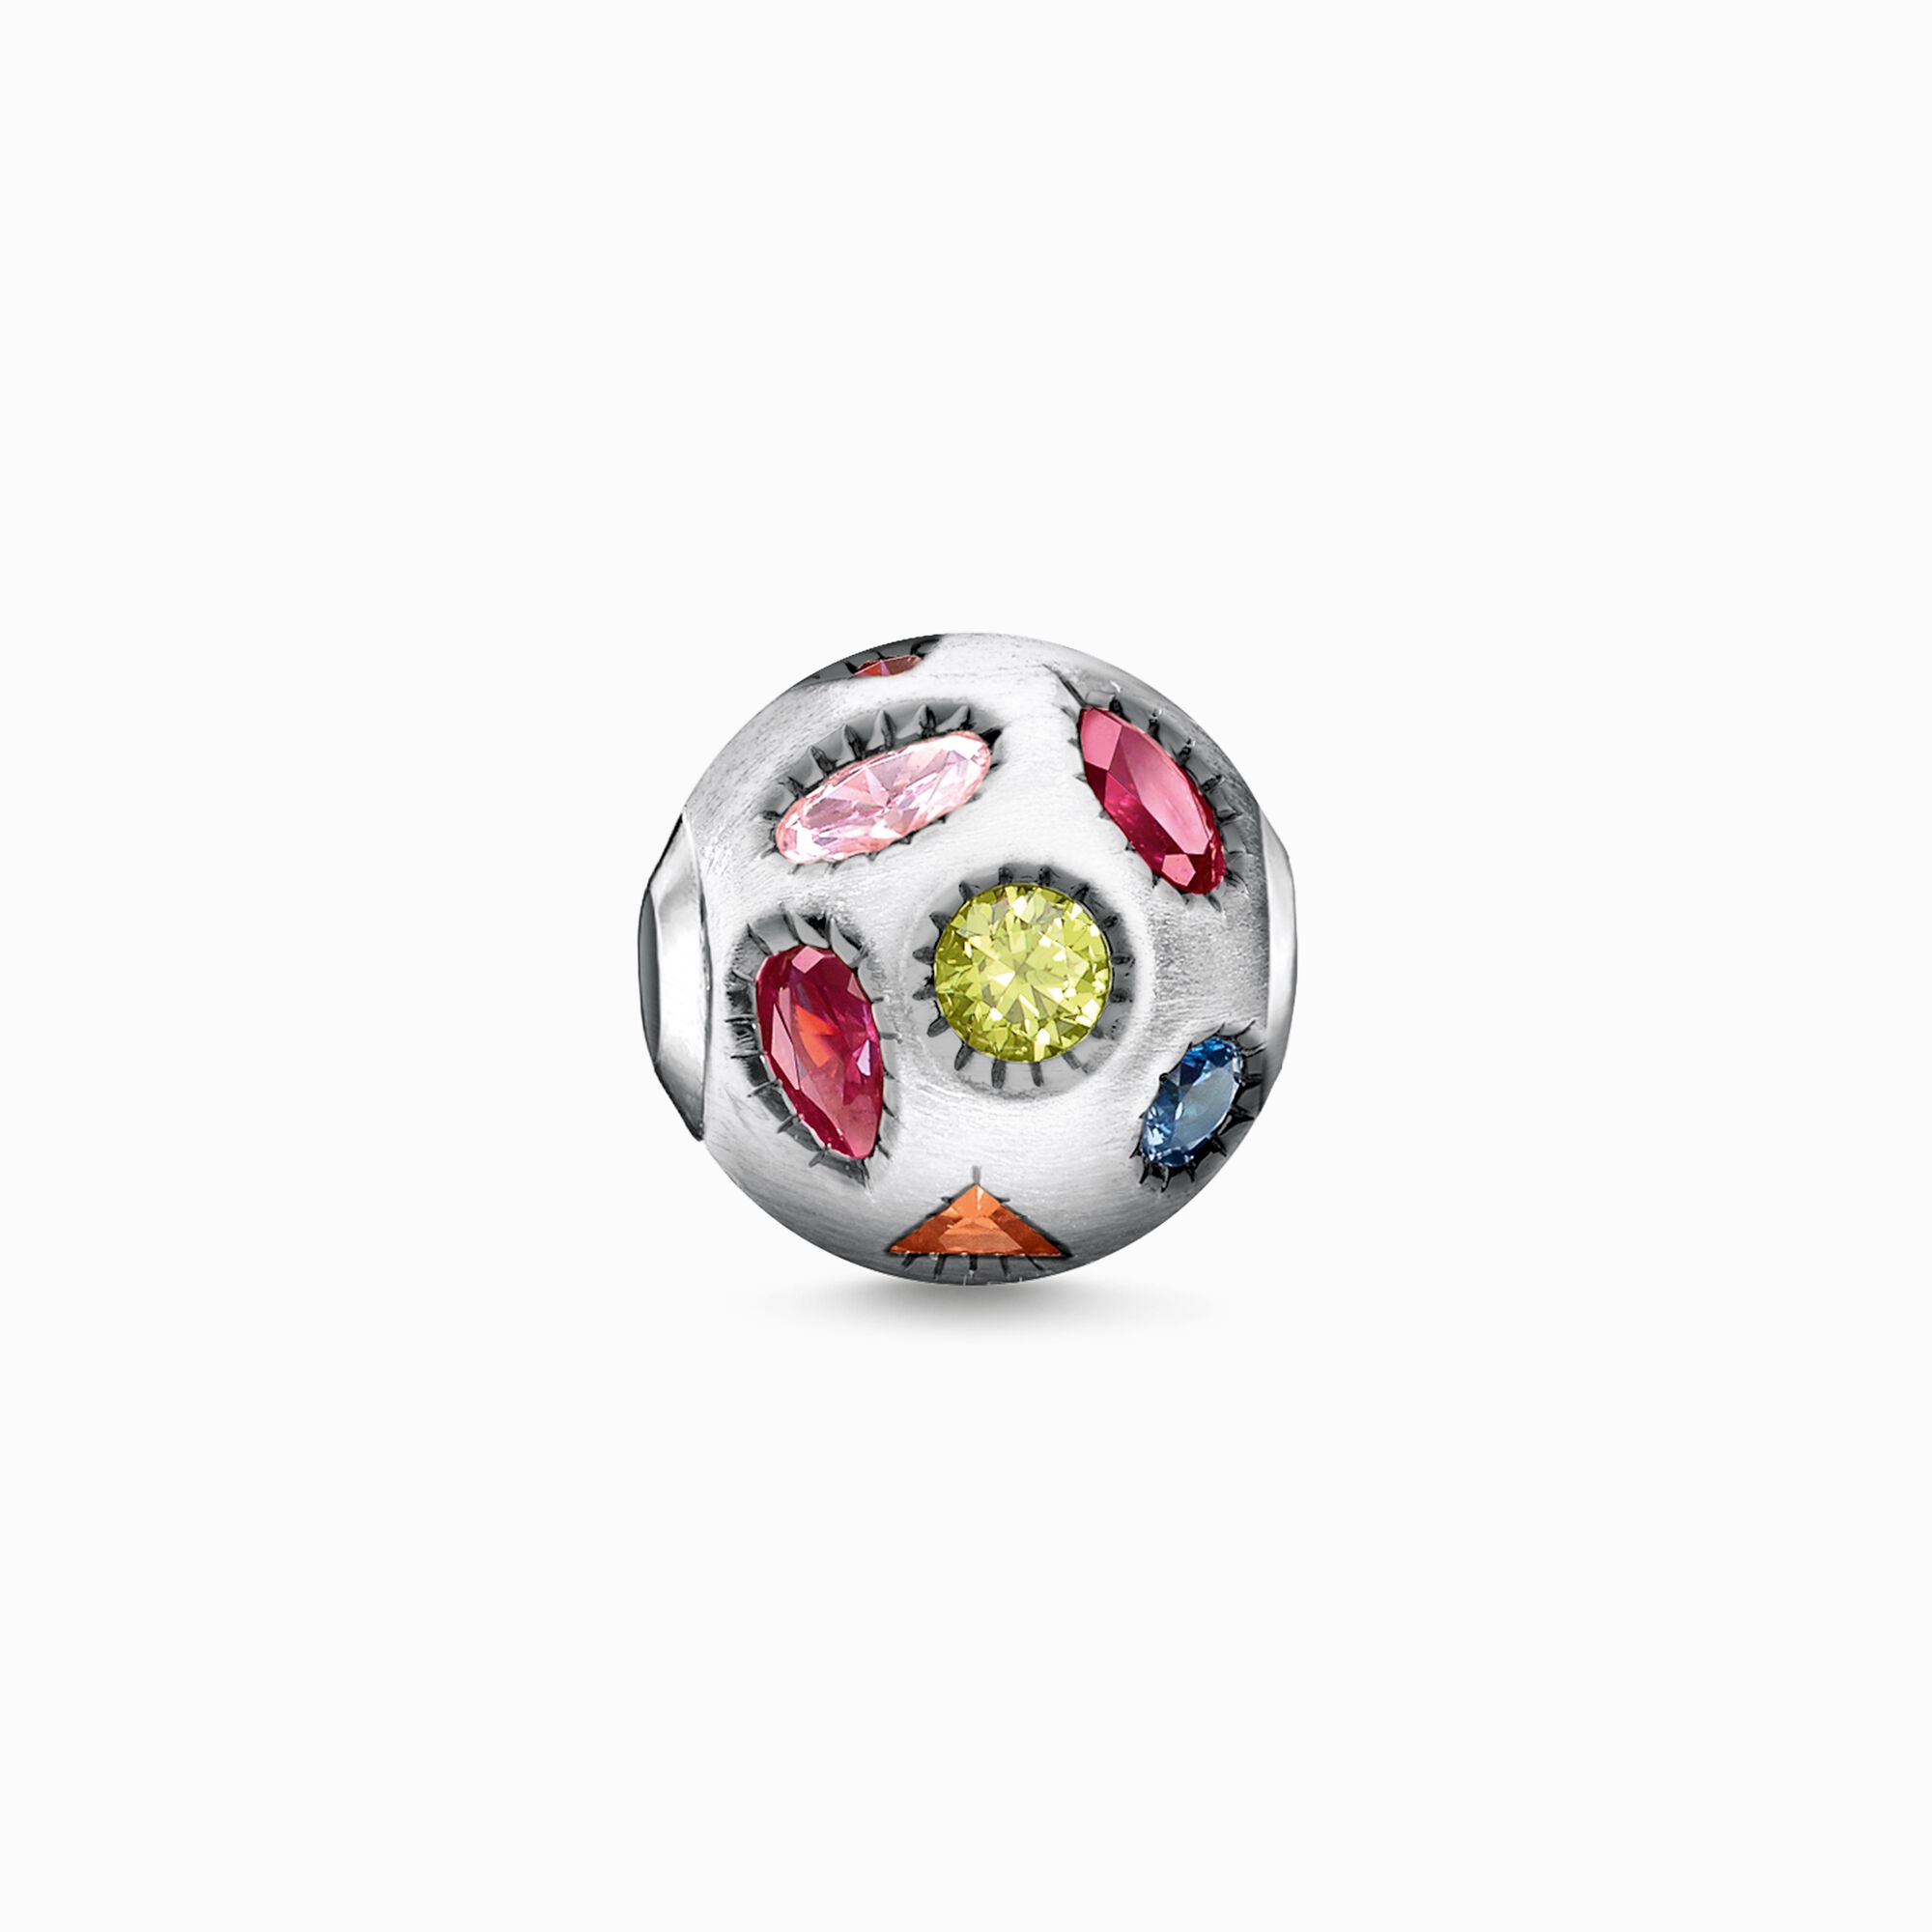 Bead Colourful Stones from the Karma Beads collection in the THOMAS SABO online store